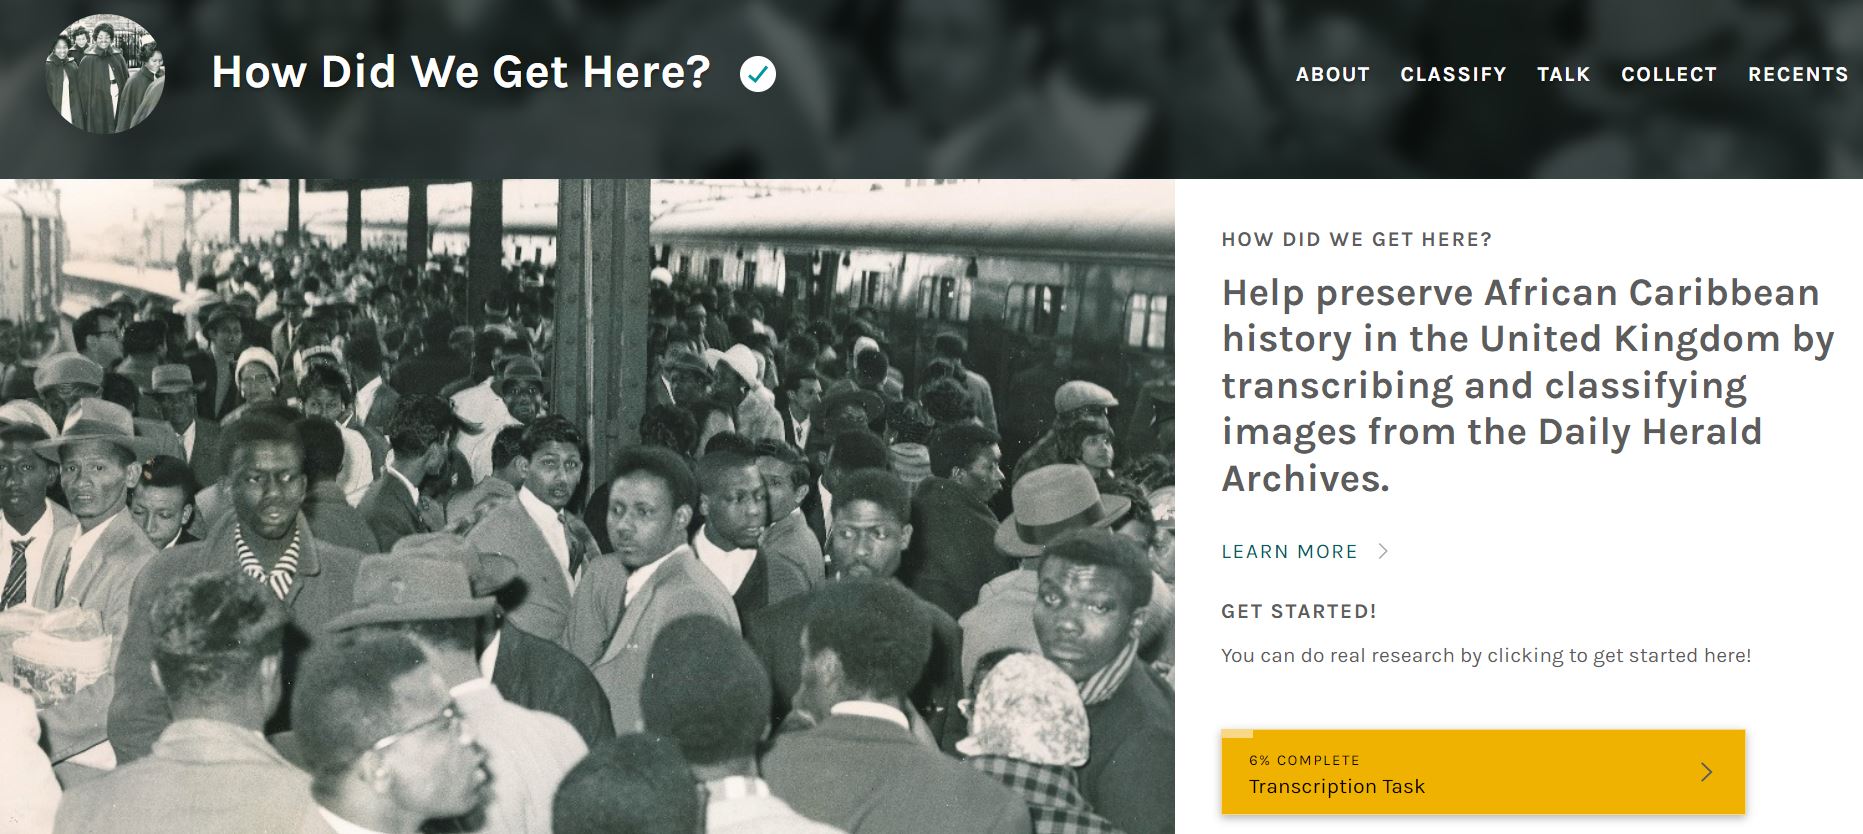 Landing page of a website reading "help preserve African Caribbean history in the united Kingdom by transcribing and classifying images from the Daily Herald Archive.